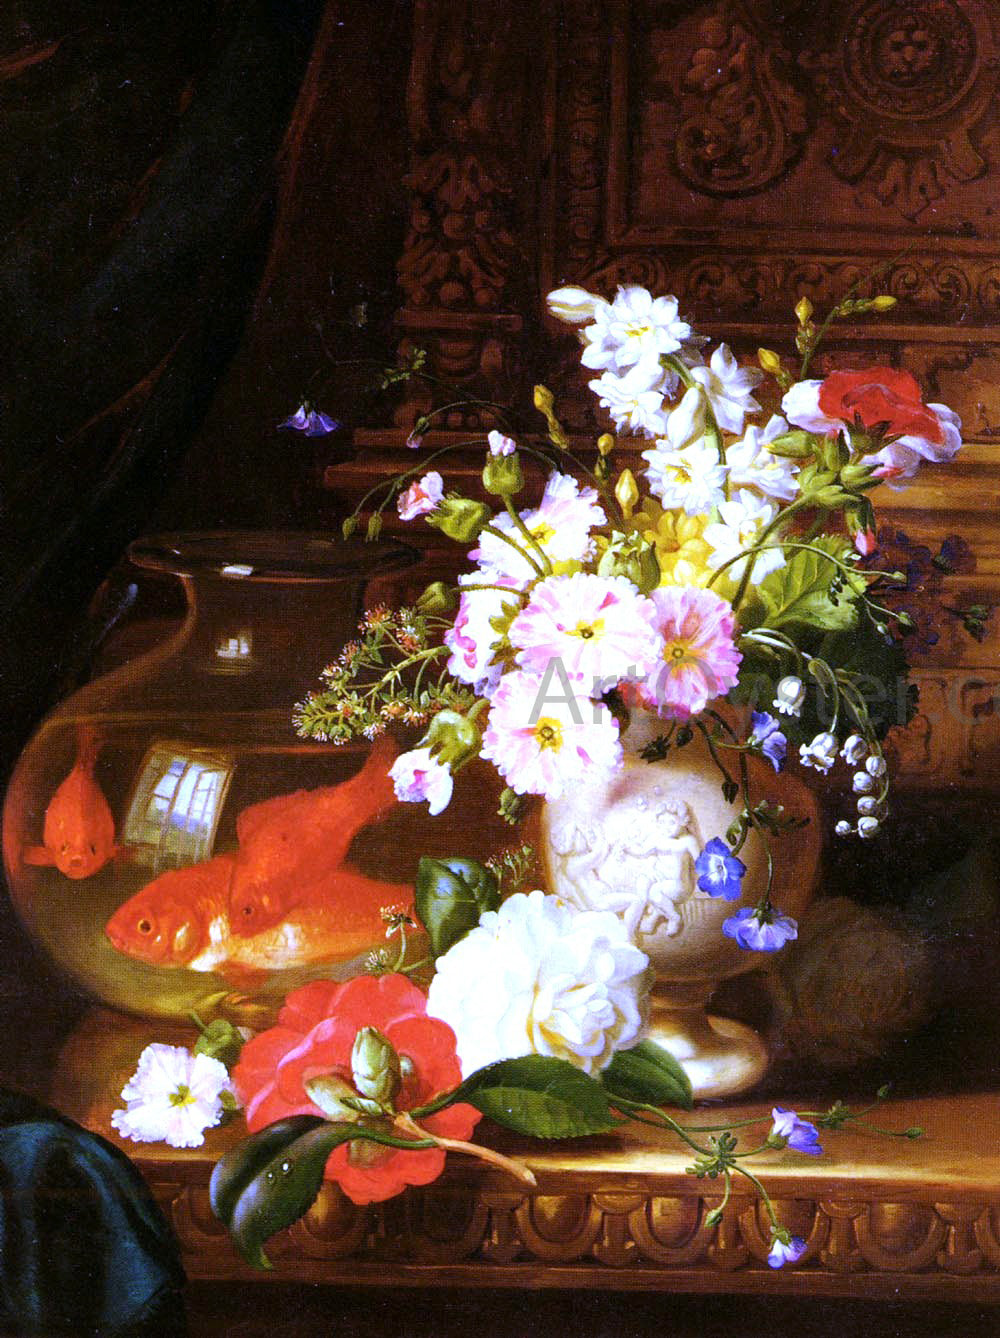  John Wainwright Still Life With Camellias, Primroses And Lily Of The Valley In An Urn By A Goldfish Bowl - Hand Painted Oil Painting